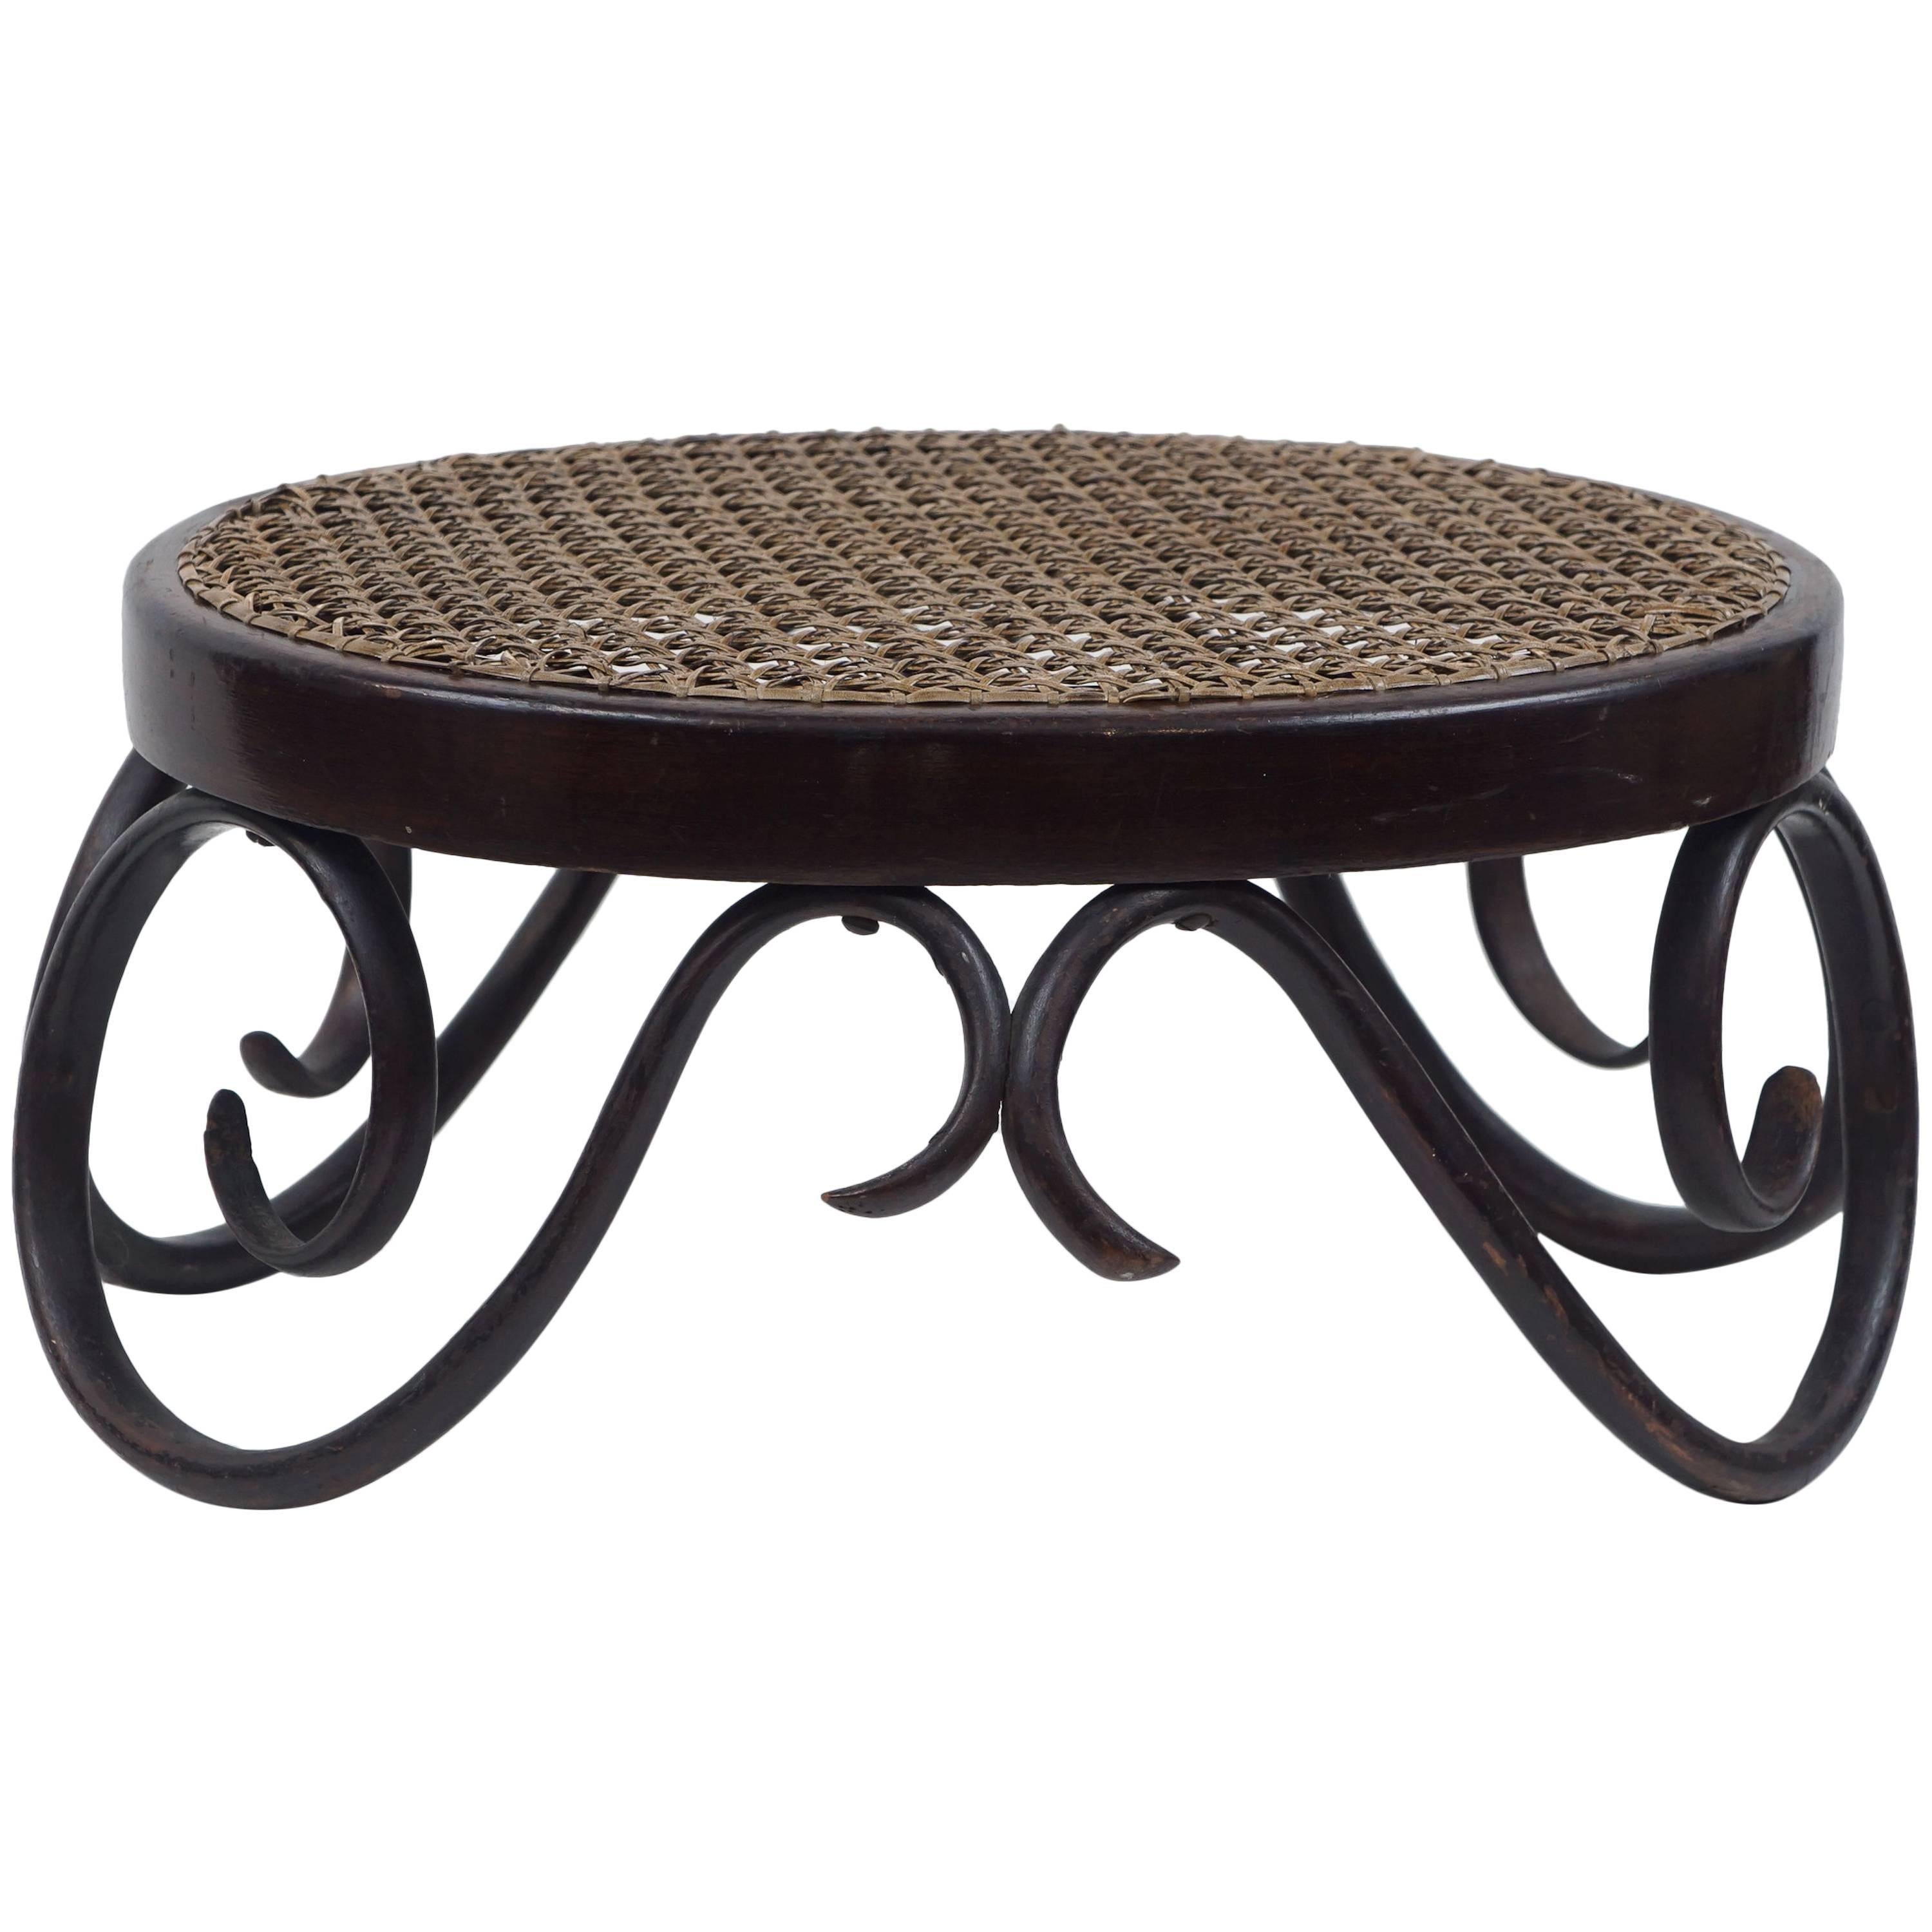 Thonet, 1904 Bentwood Foot Stool For Sale